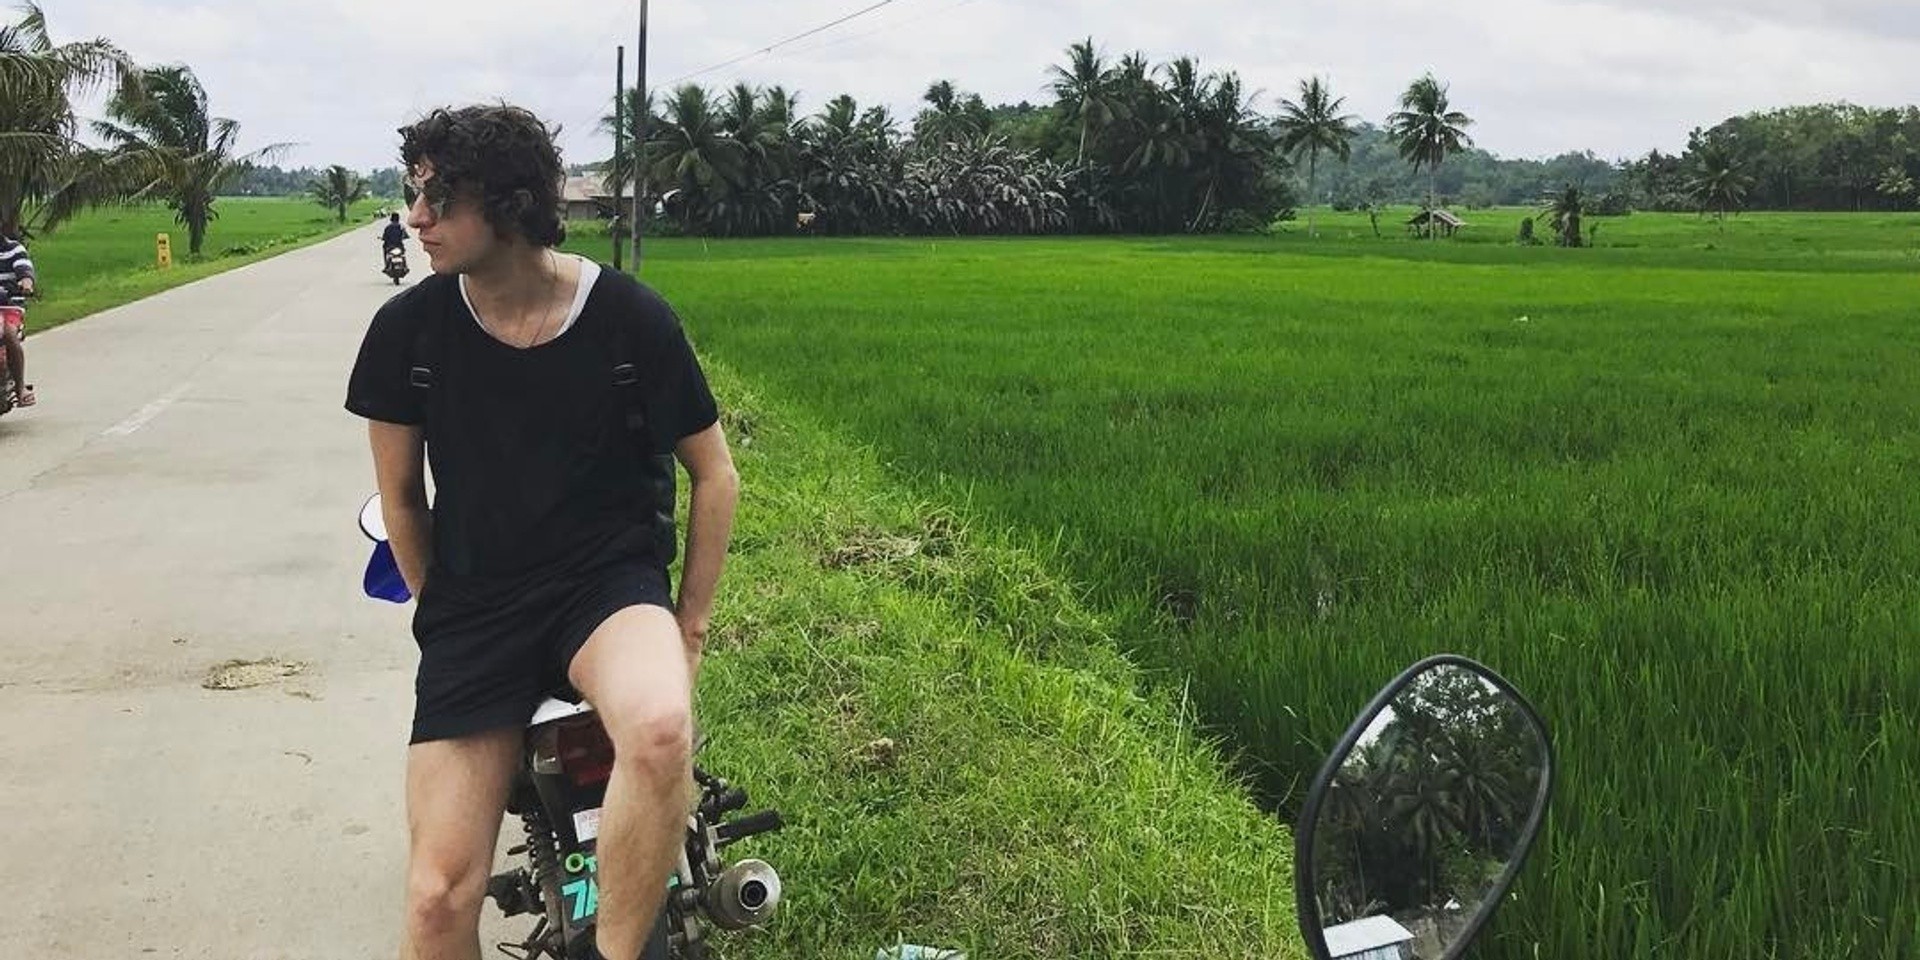 WATCH: The Kooks vocalist Luke Pritchard performs "Ooh La" in the Philippines